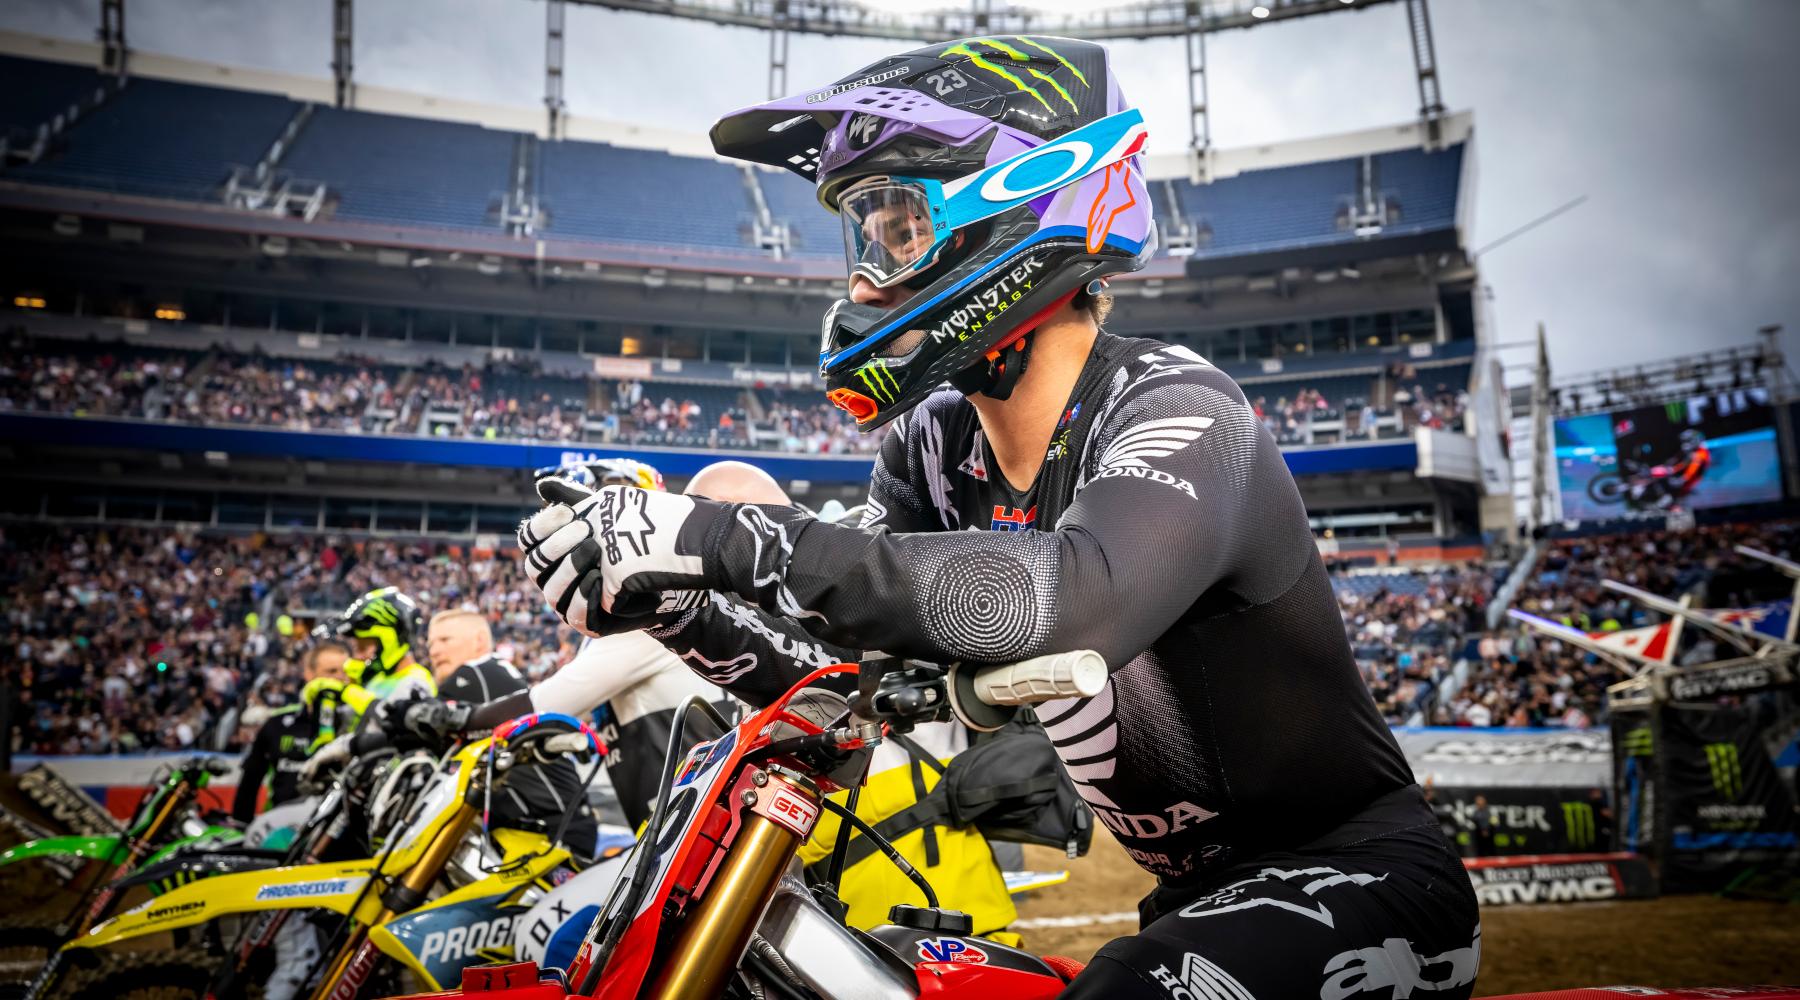 RESULTS FROM AMA SUPERCROSS IN SALT LAKE CITY